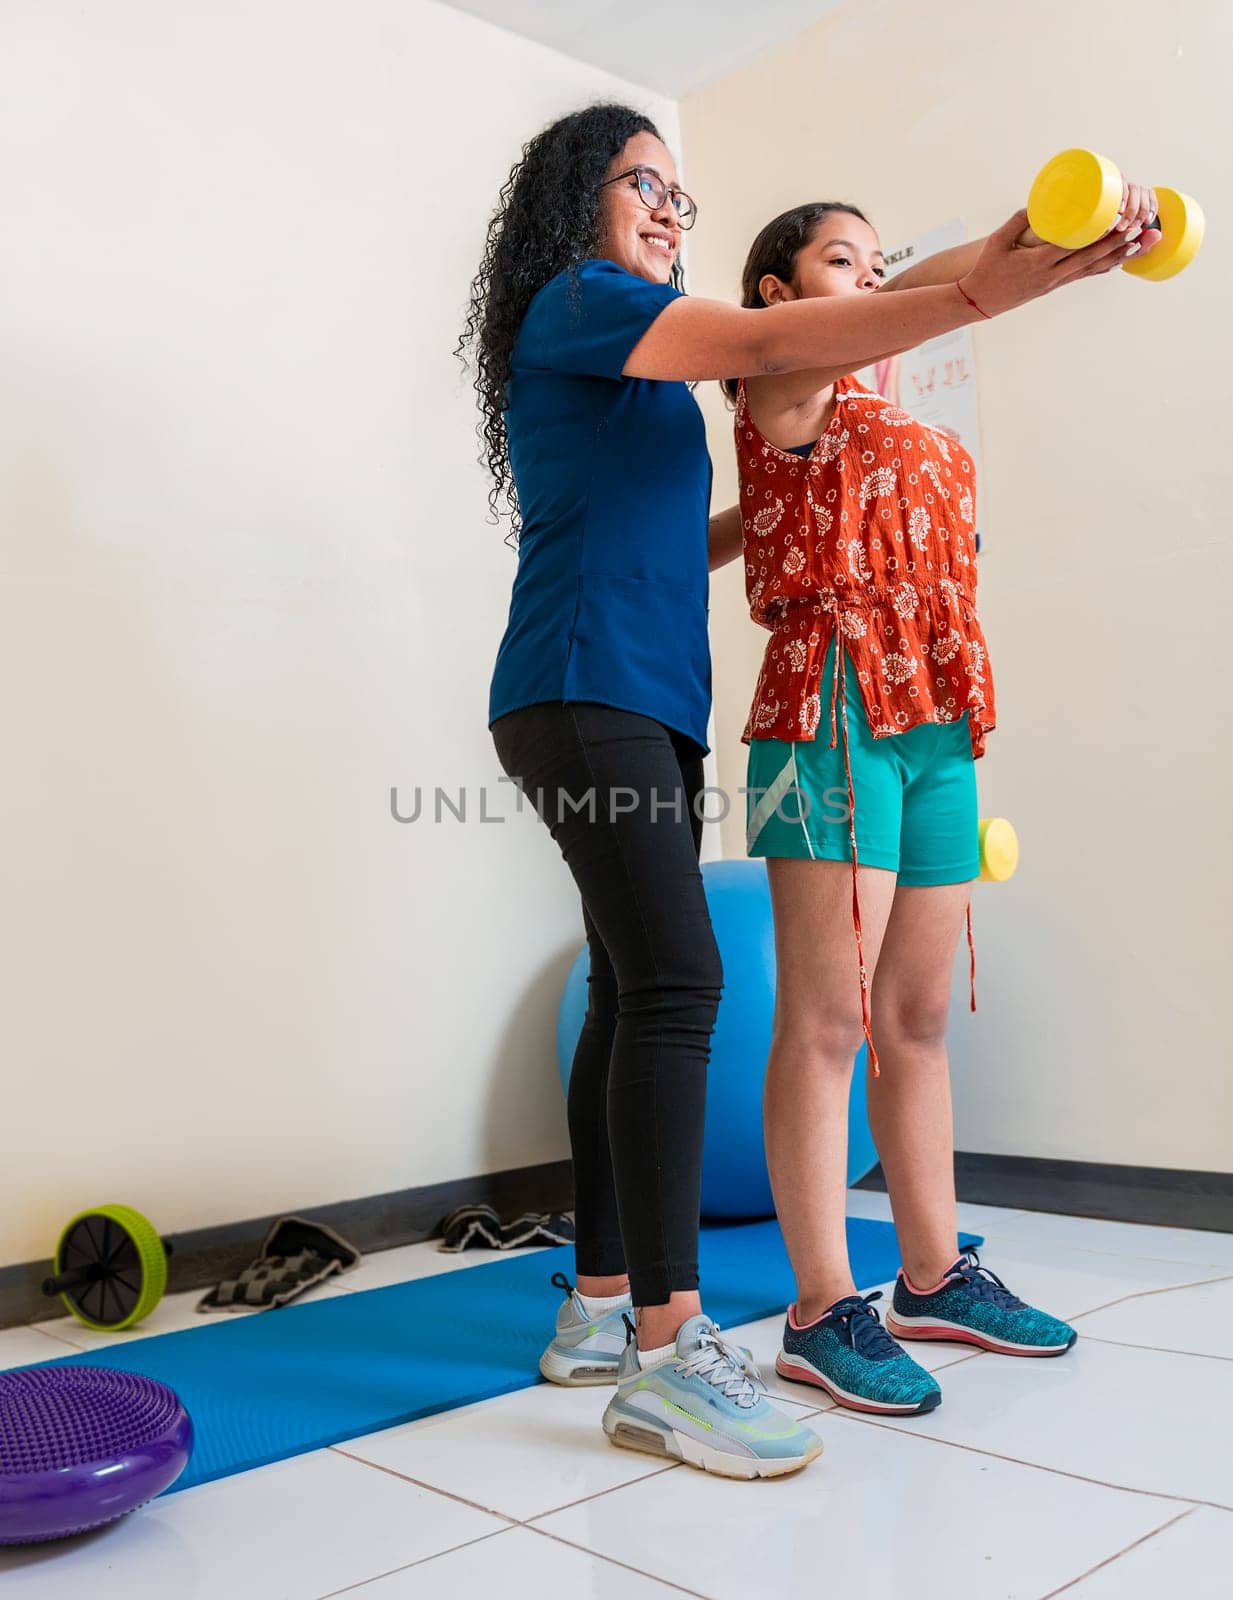 Rehabilitation physiotherapy with dumbbells. Physiotherapist helping patient with dumbbells on rehabilitation ball by isaiphoto